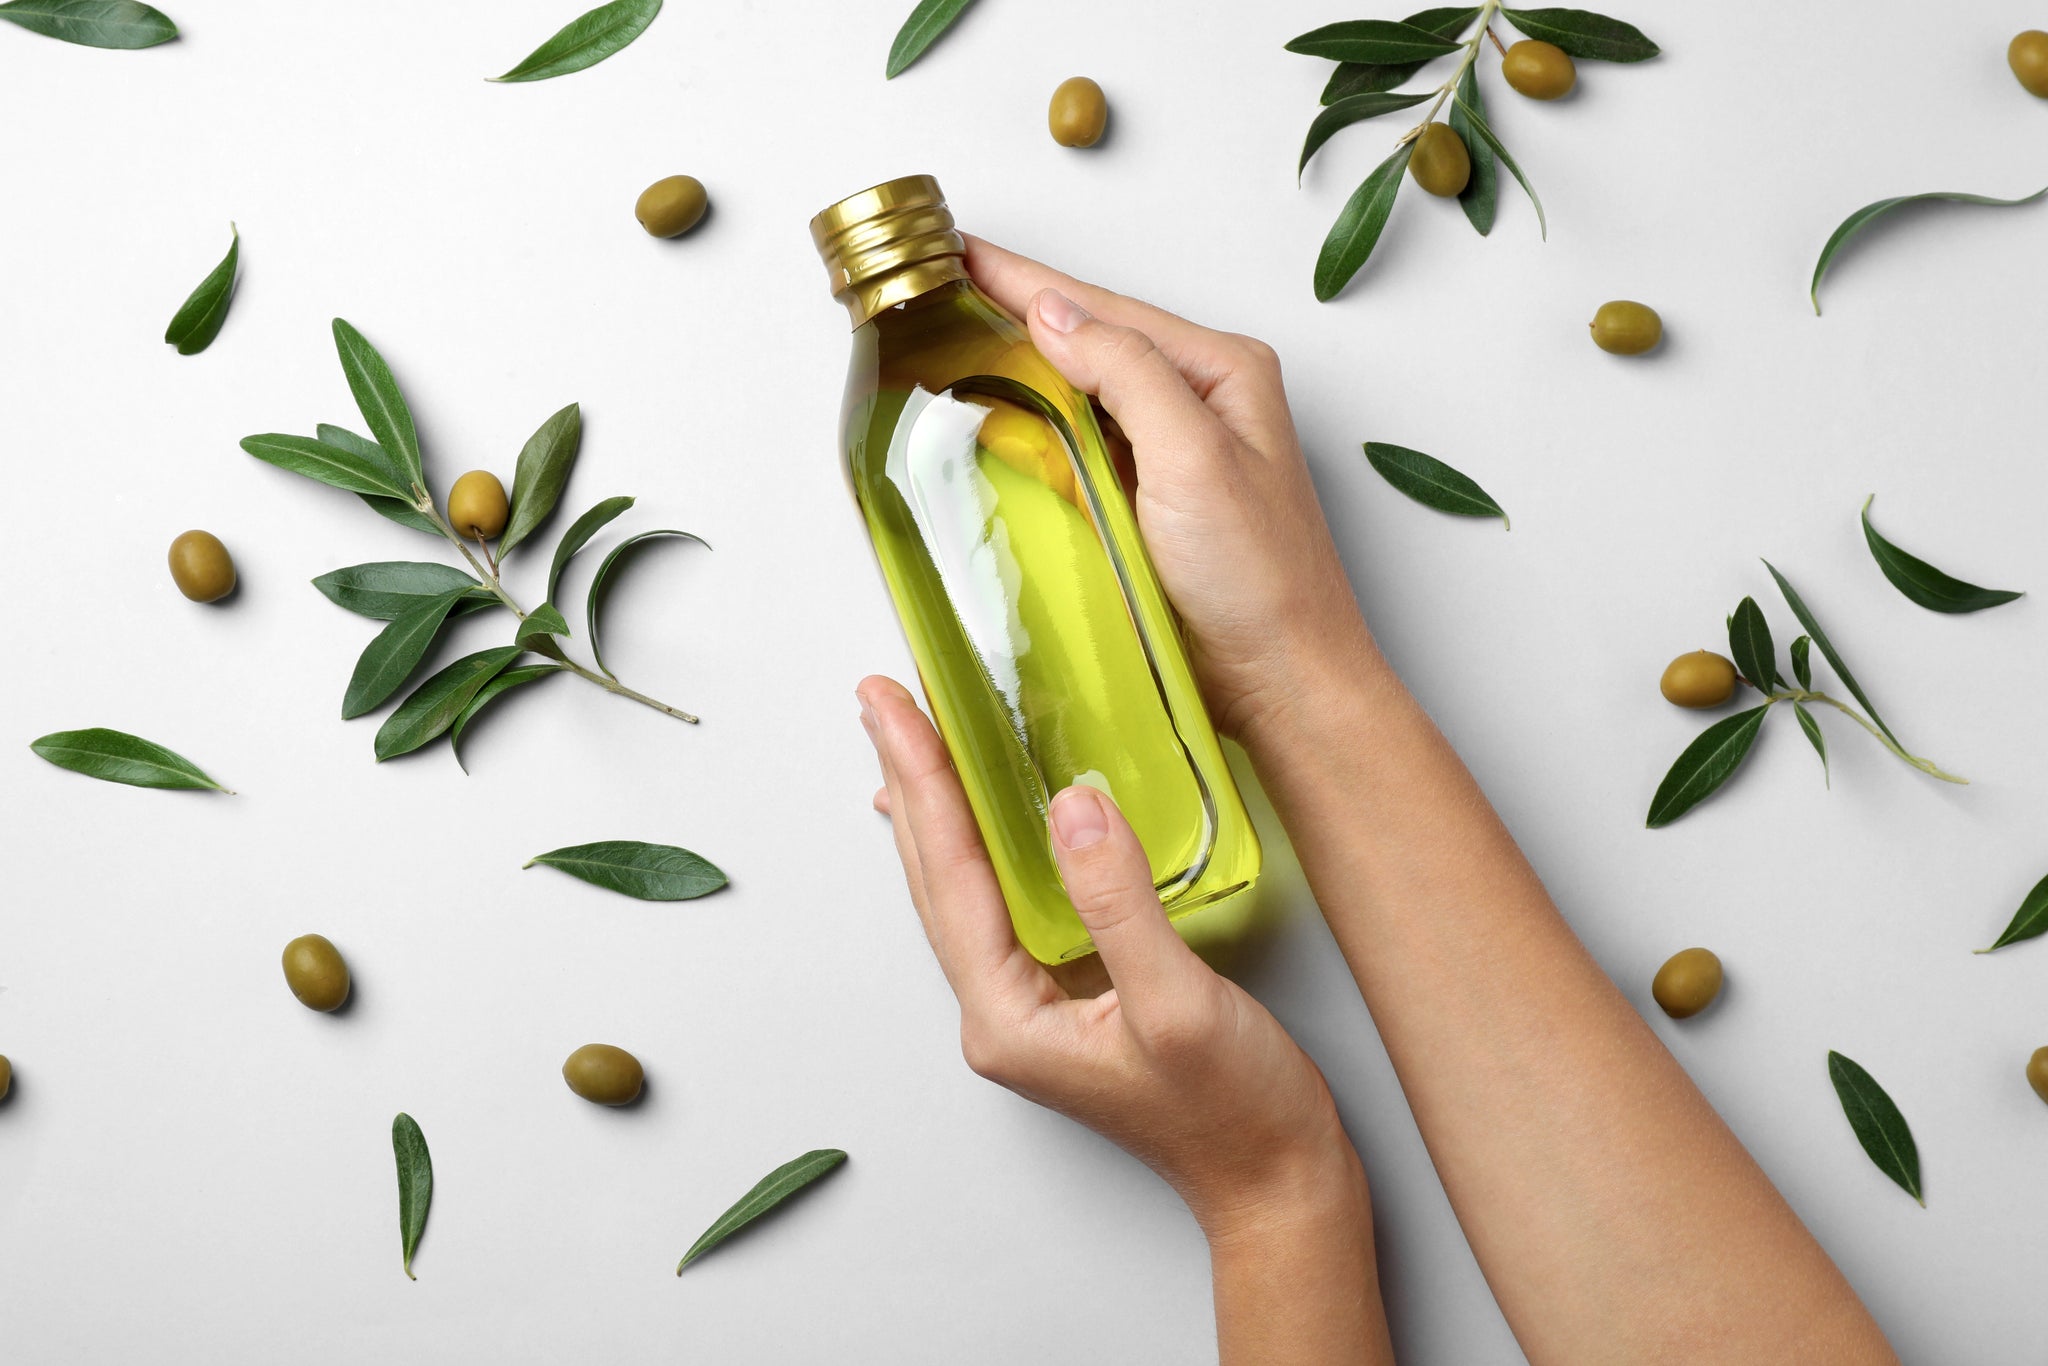 olive oil as a carrier for CBD